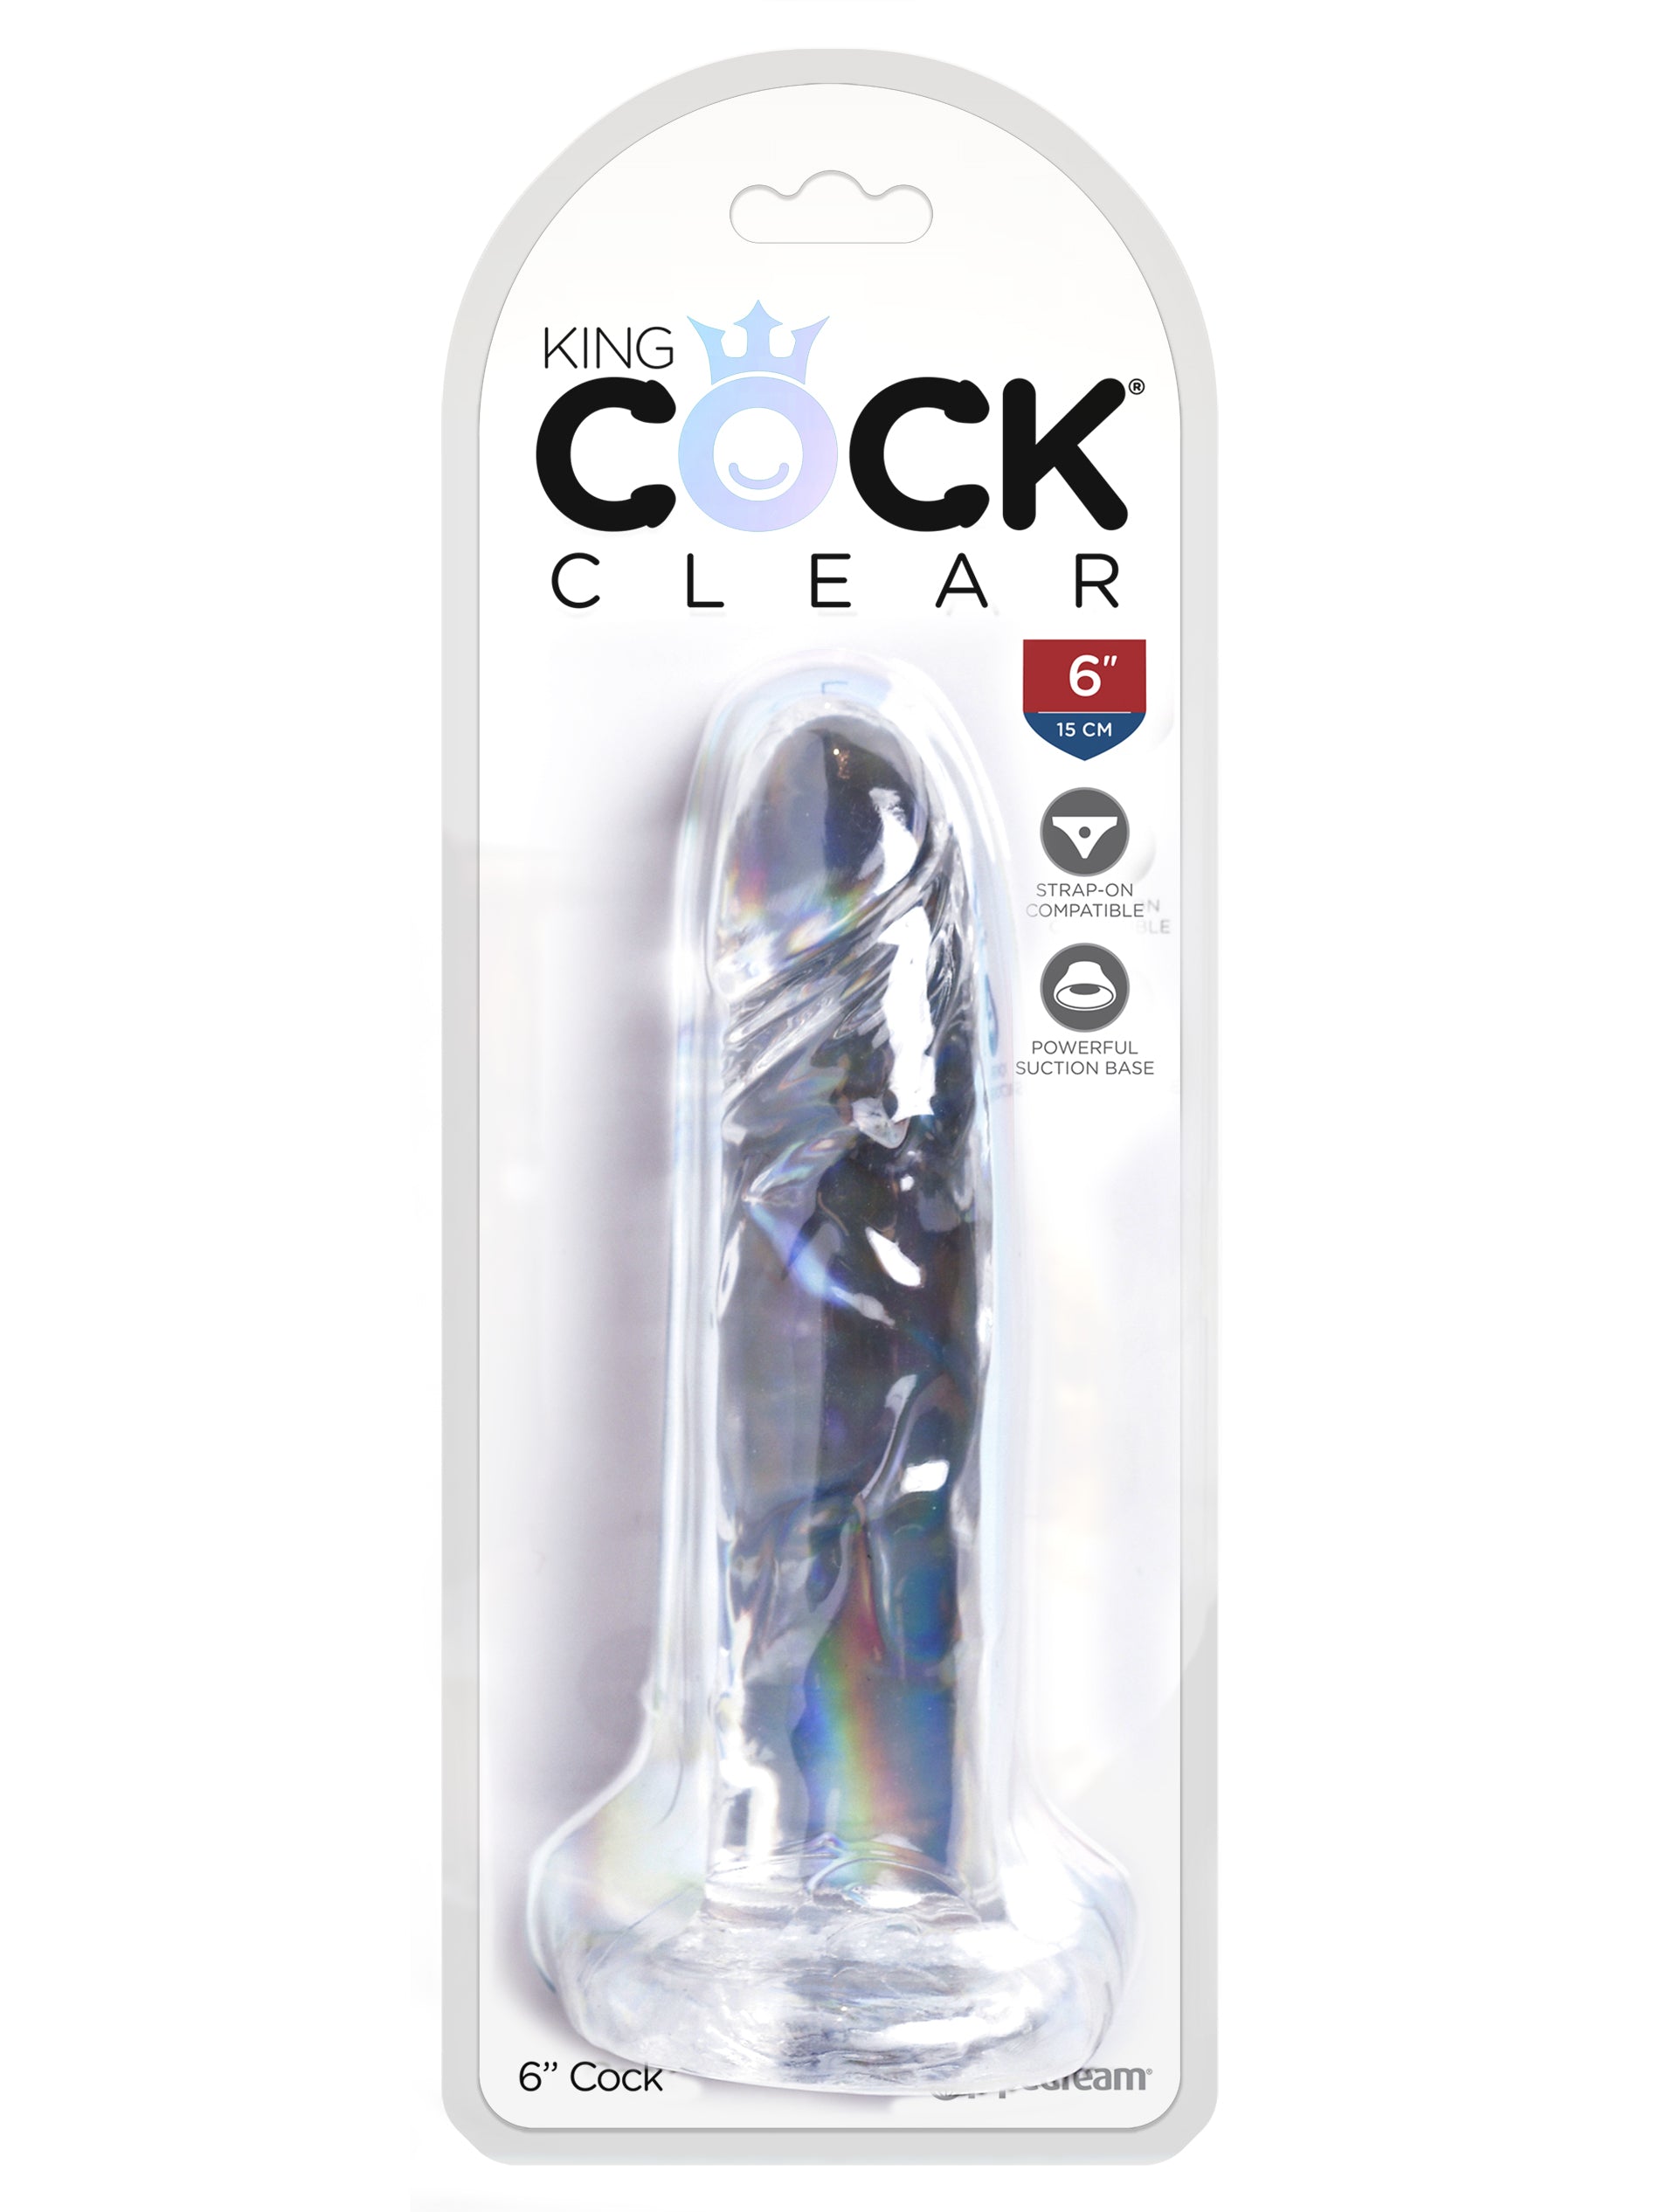 King Cock Clear 6" Cock PD5753-20